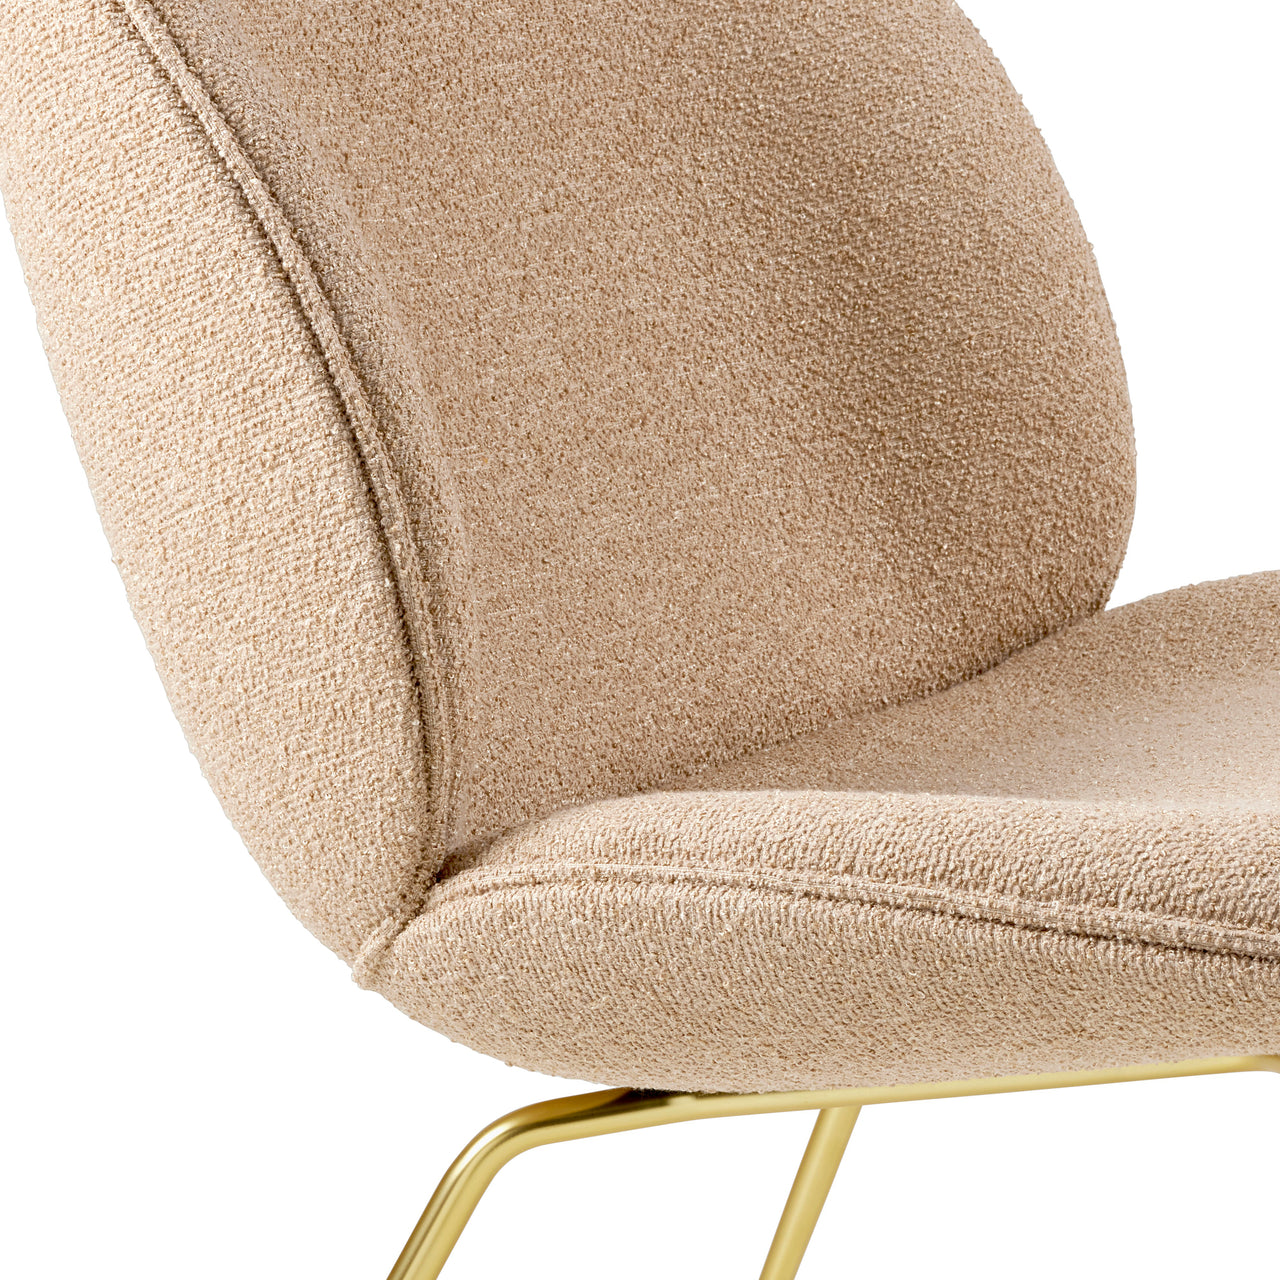 Beetle Lounge Chair: Conic Base + Full Upholstery